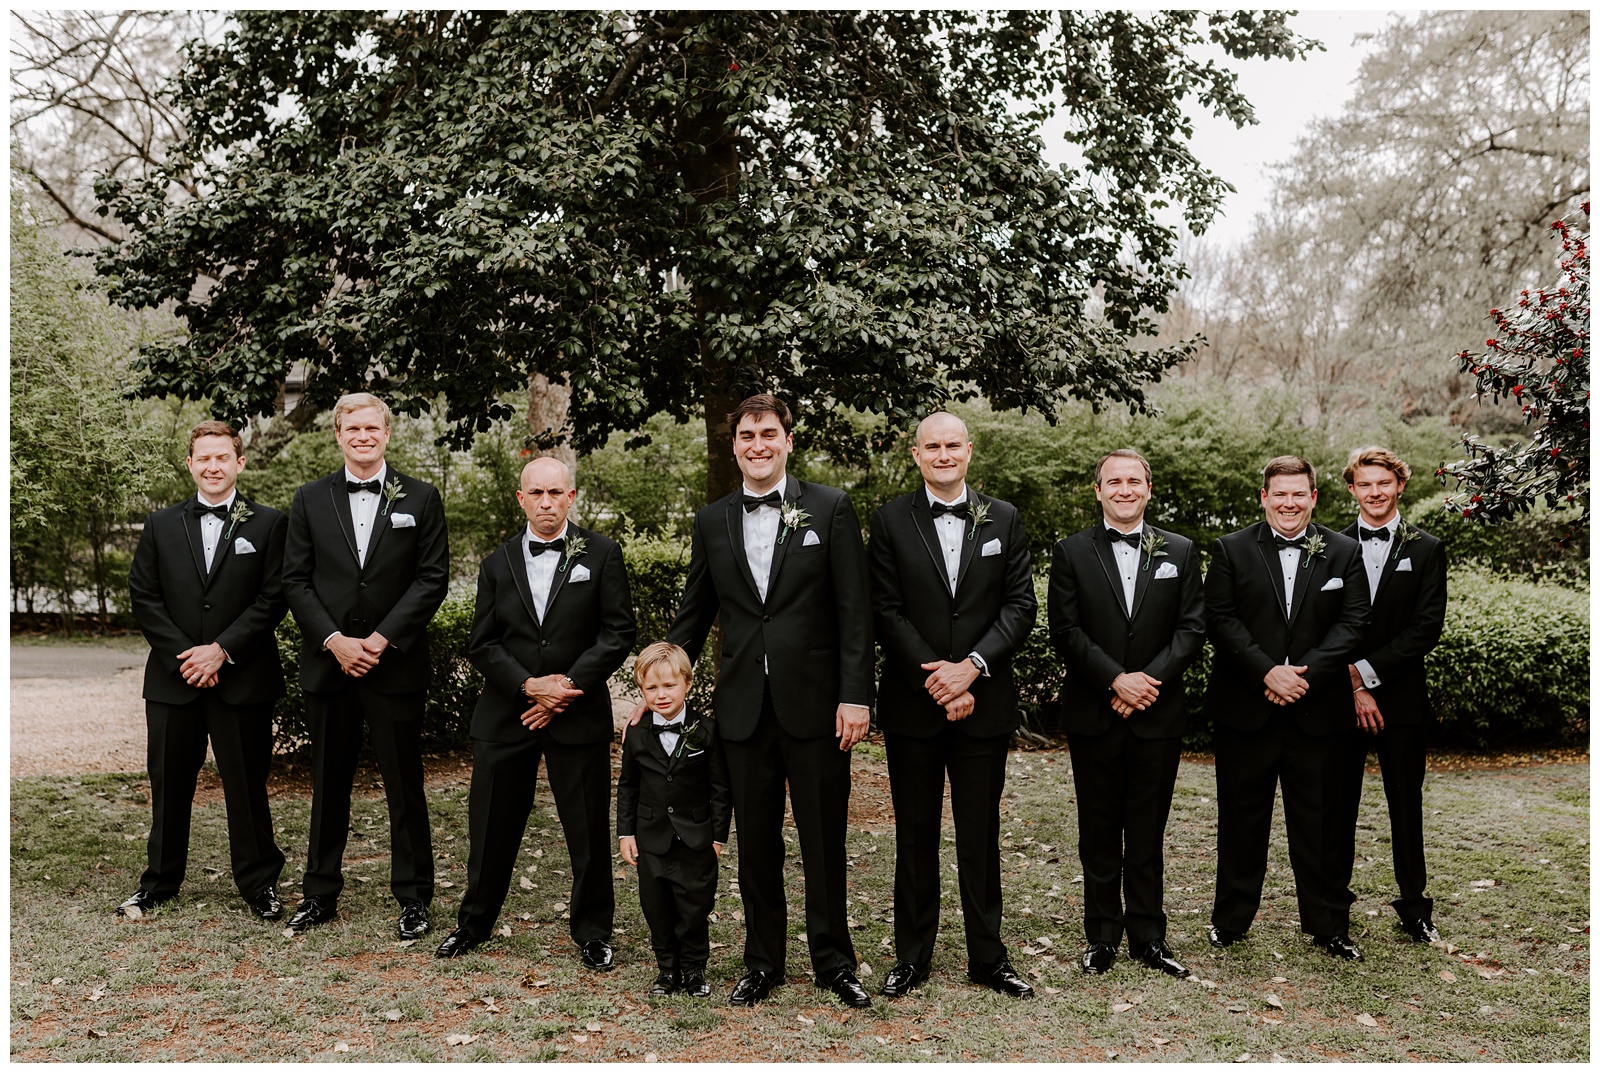 Rich results on Google's SERP when searching for "Groom and Groomsmen style"